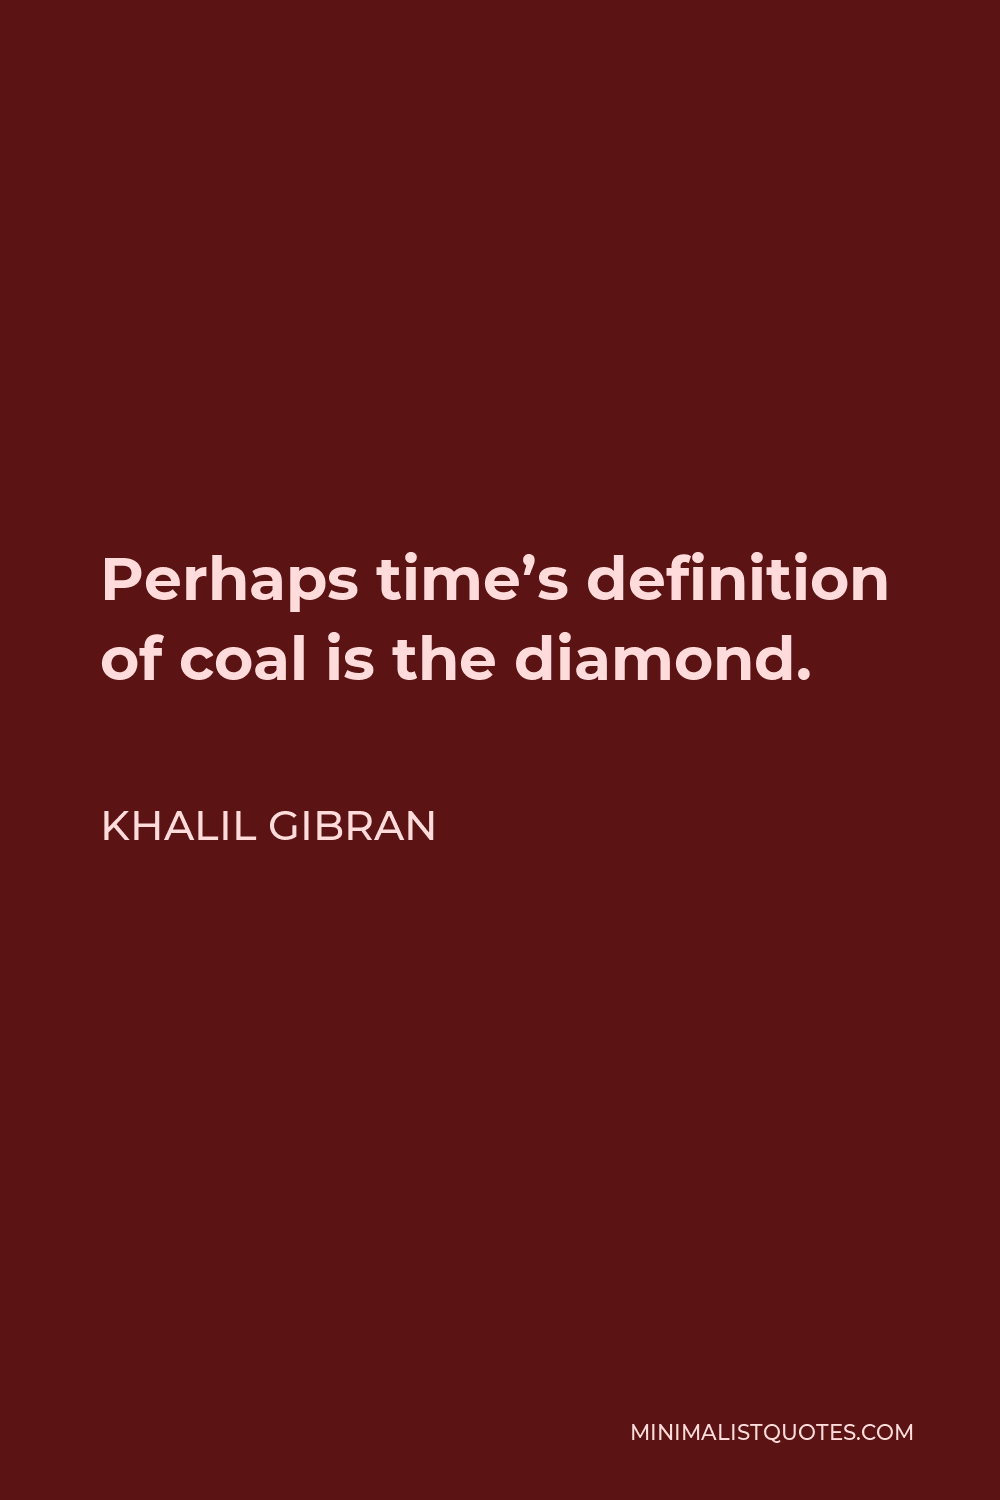 Khalil Gibran Quote - Perhaps time’s definition of coal is the diamond.